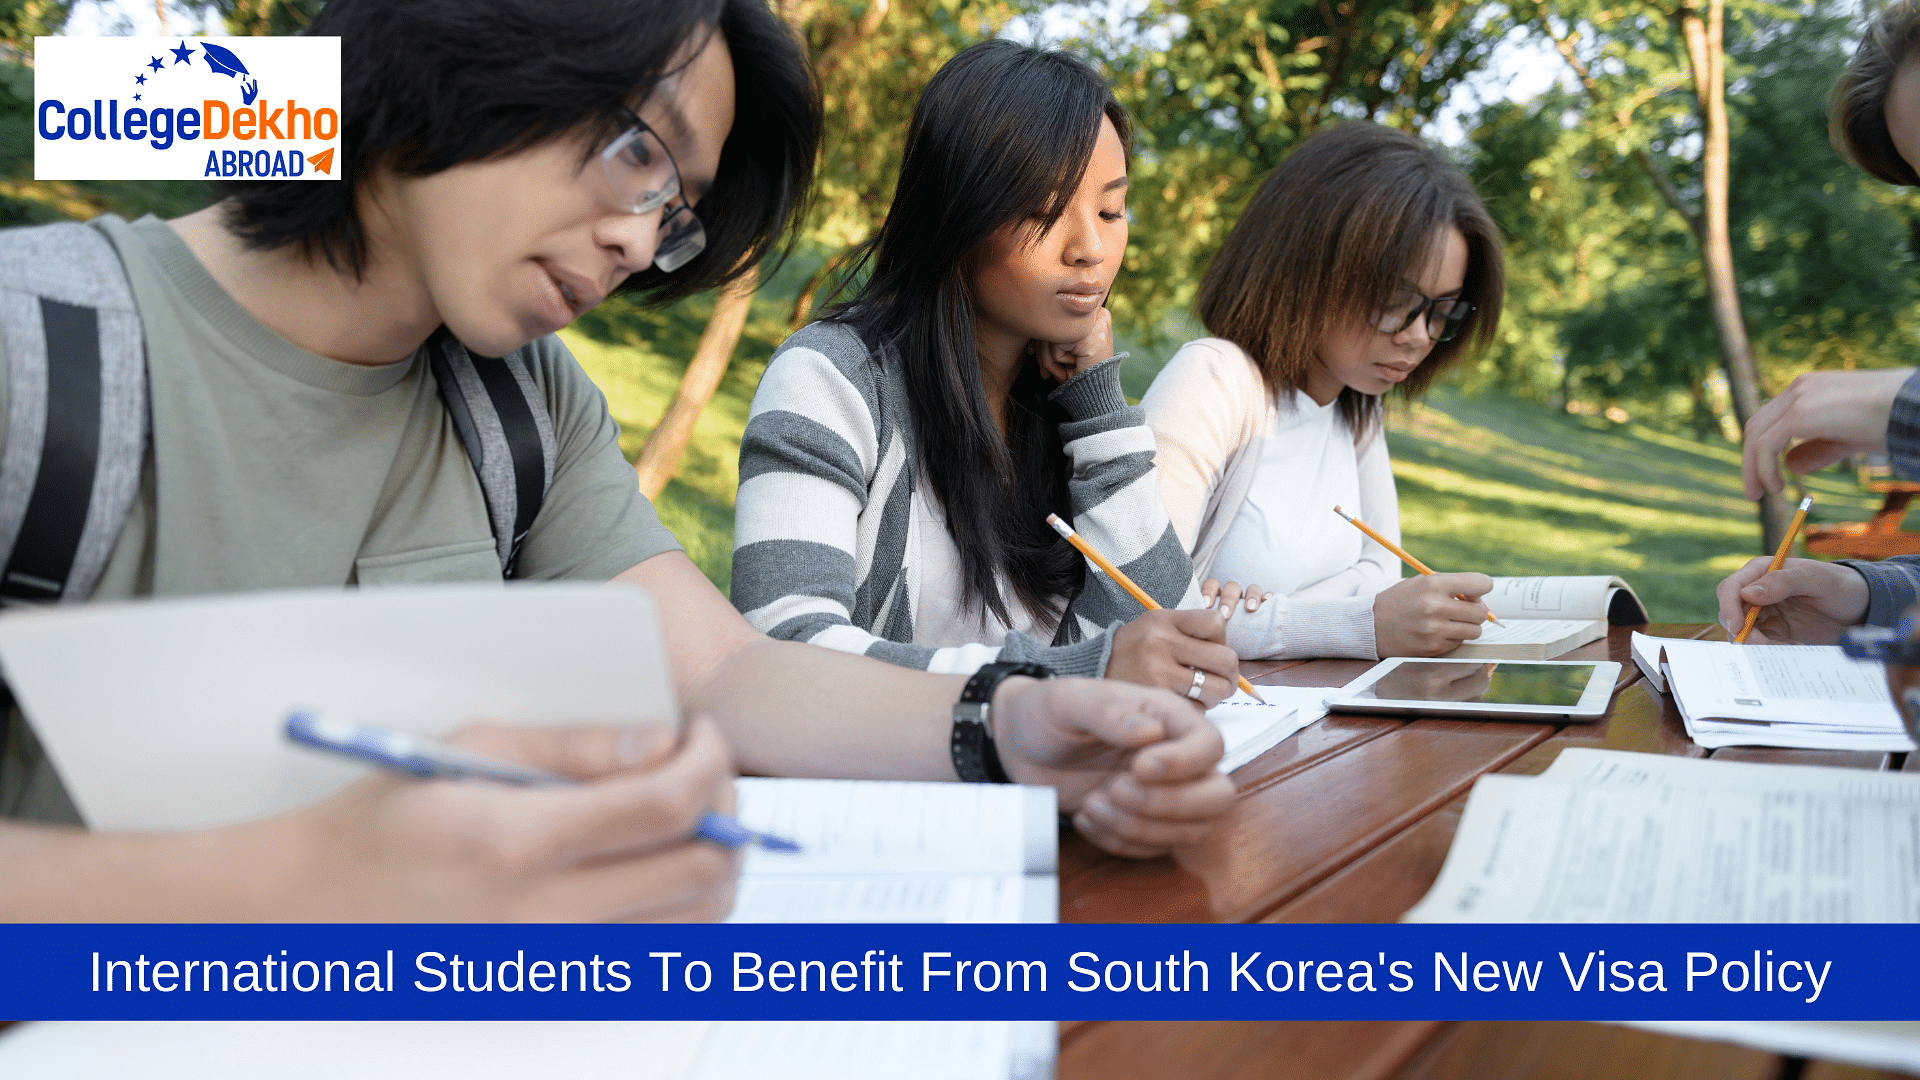 International Students To Benefit From South Korea's New Visa Policy